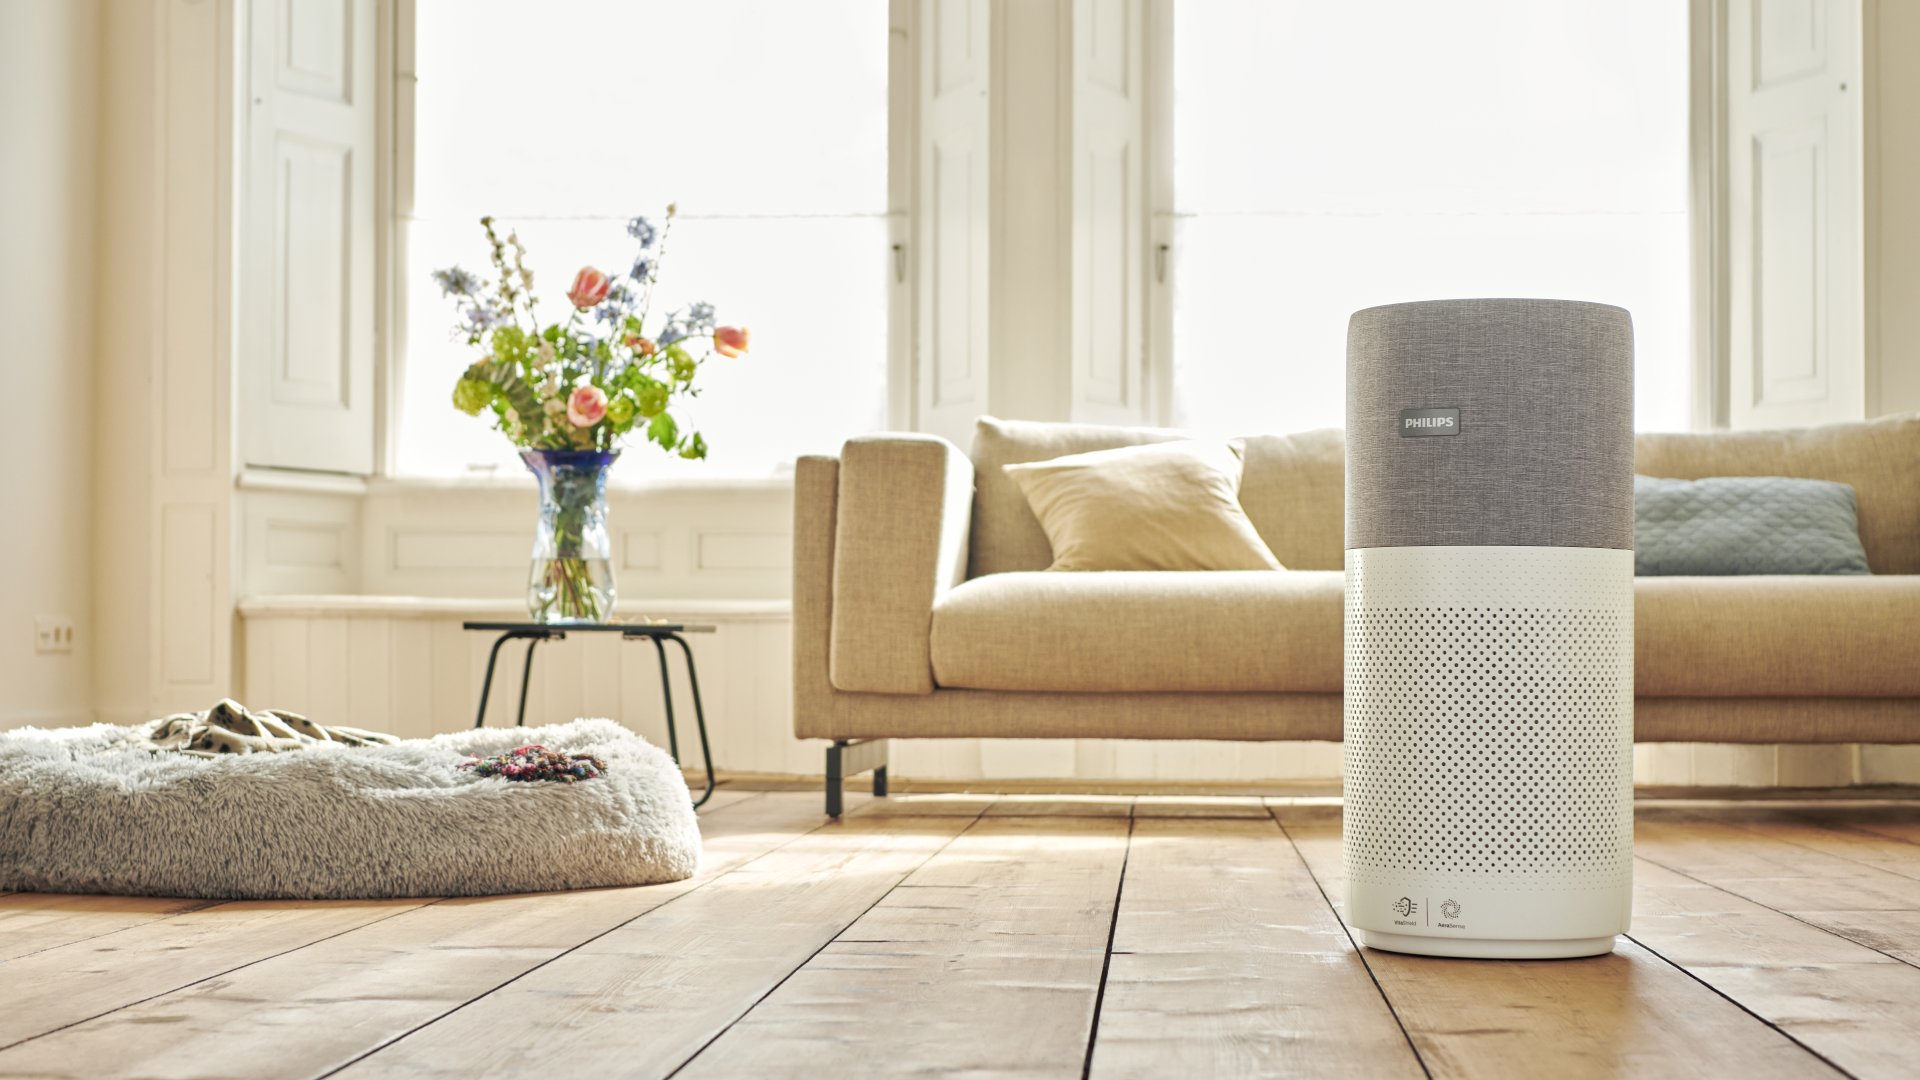 Using Philips AeraSense technology, the Philips Air Purifier 3000i Series continuously monitors the air and can purify air in a room of 20m2 in less than eight minutes16.